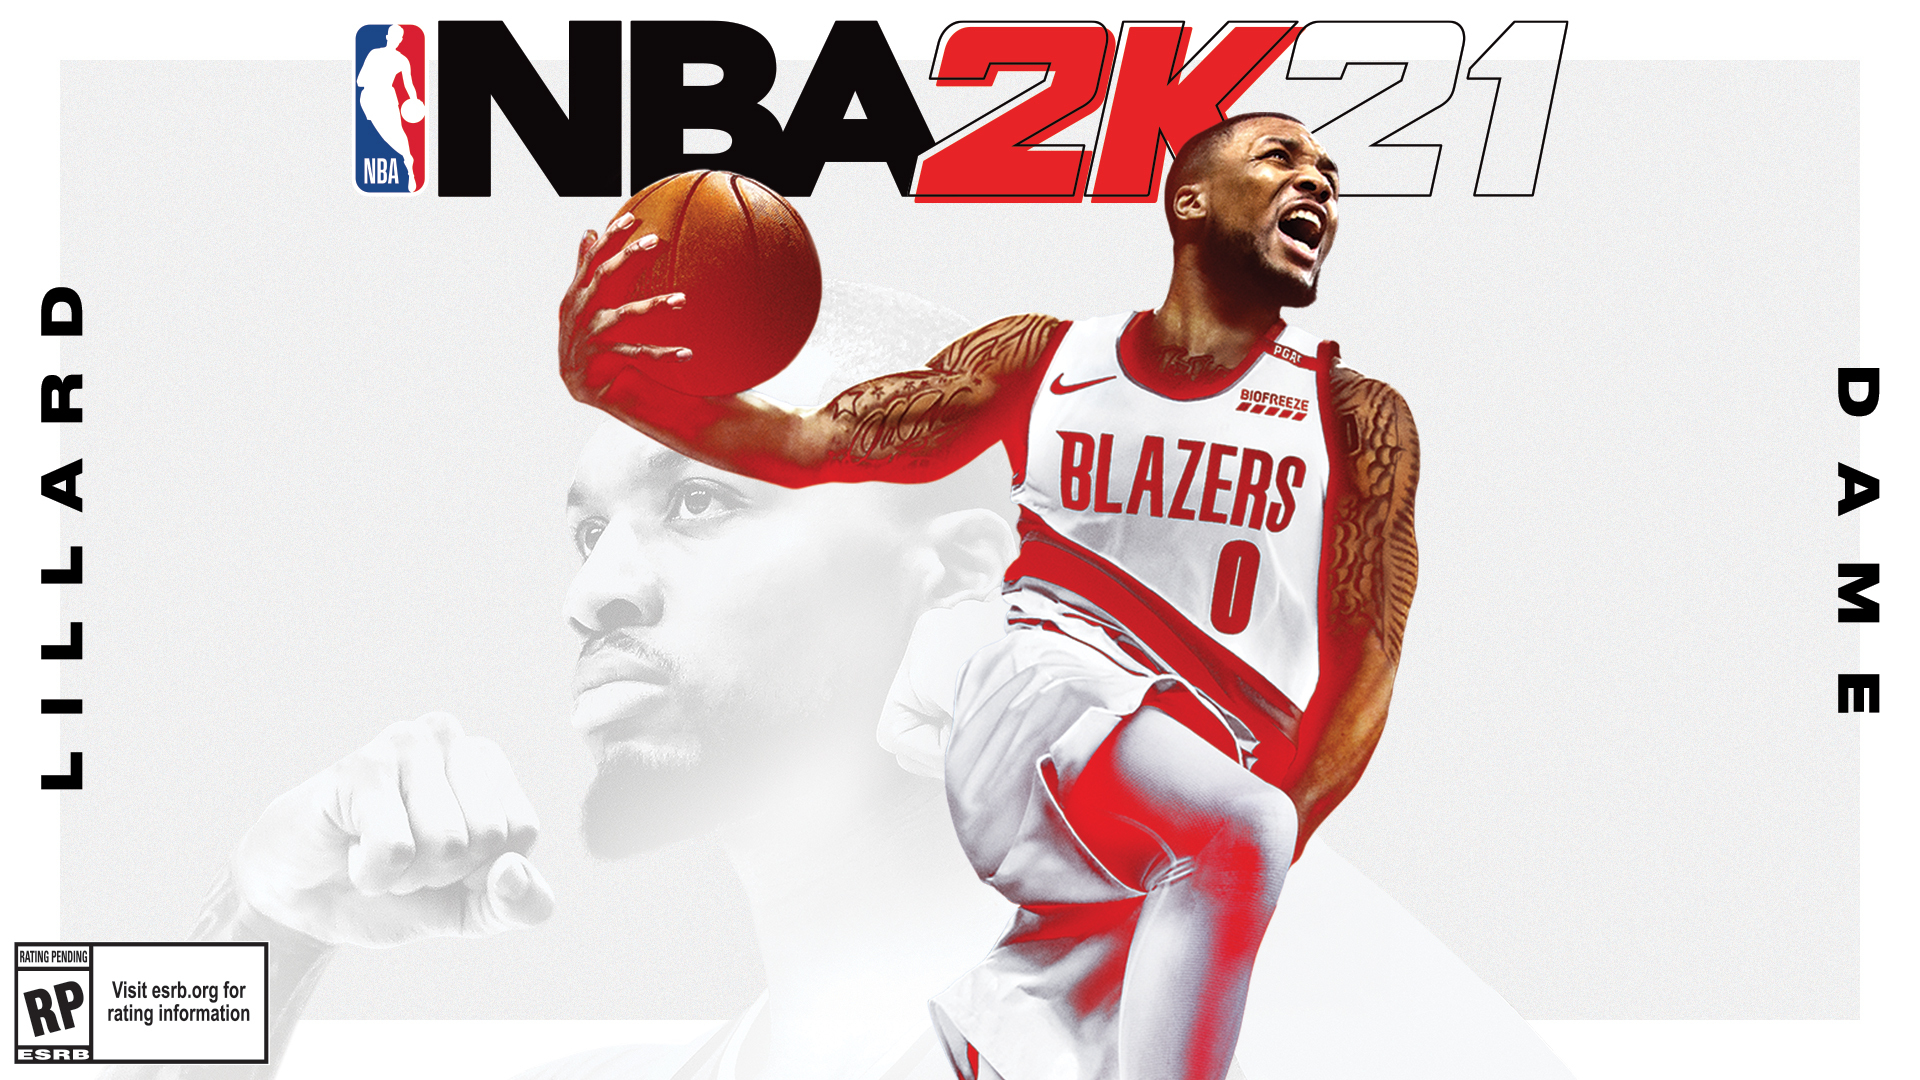 NBA 2K21 on Sale For $9.59, Mamba Forever Edition $24.99 on Steam